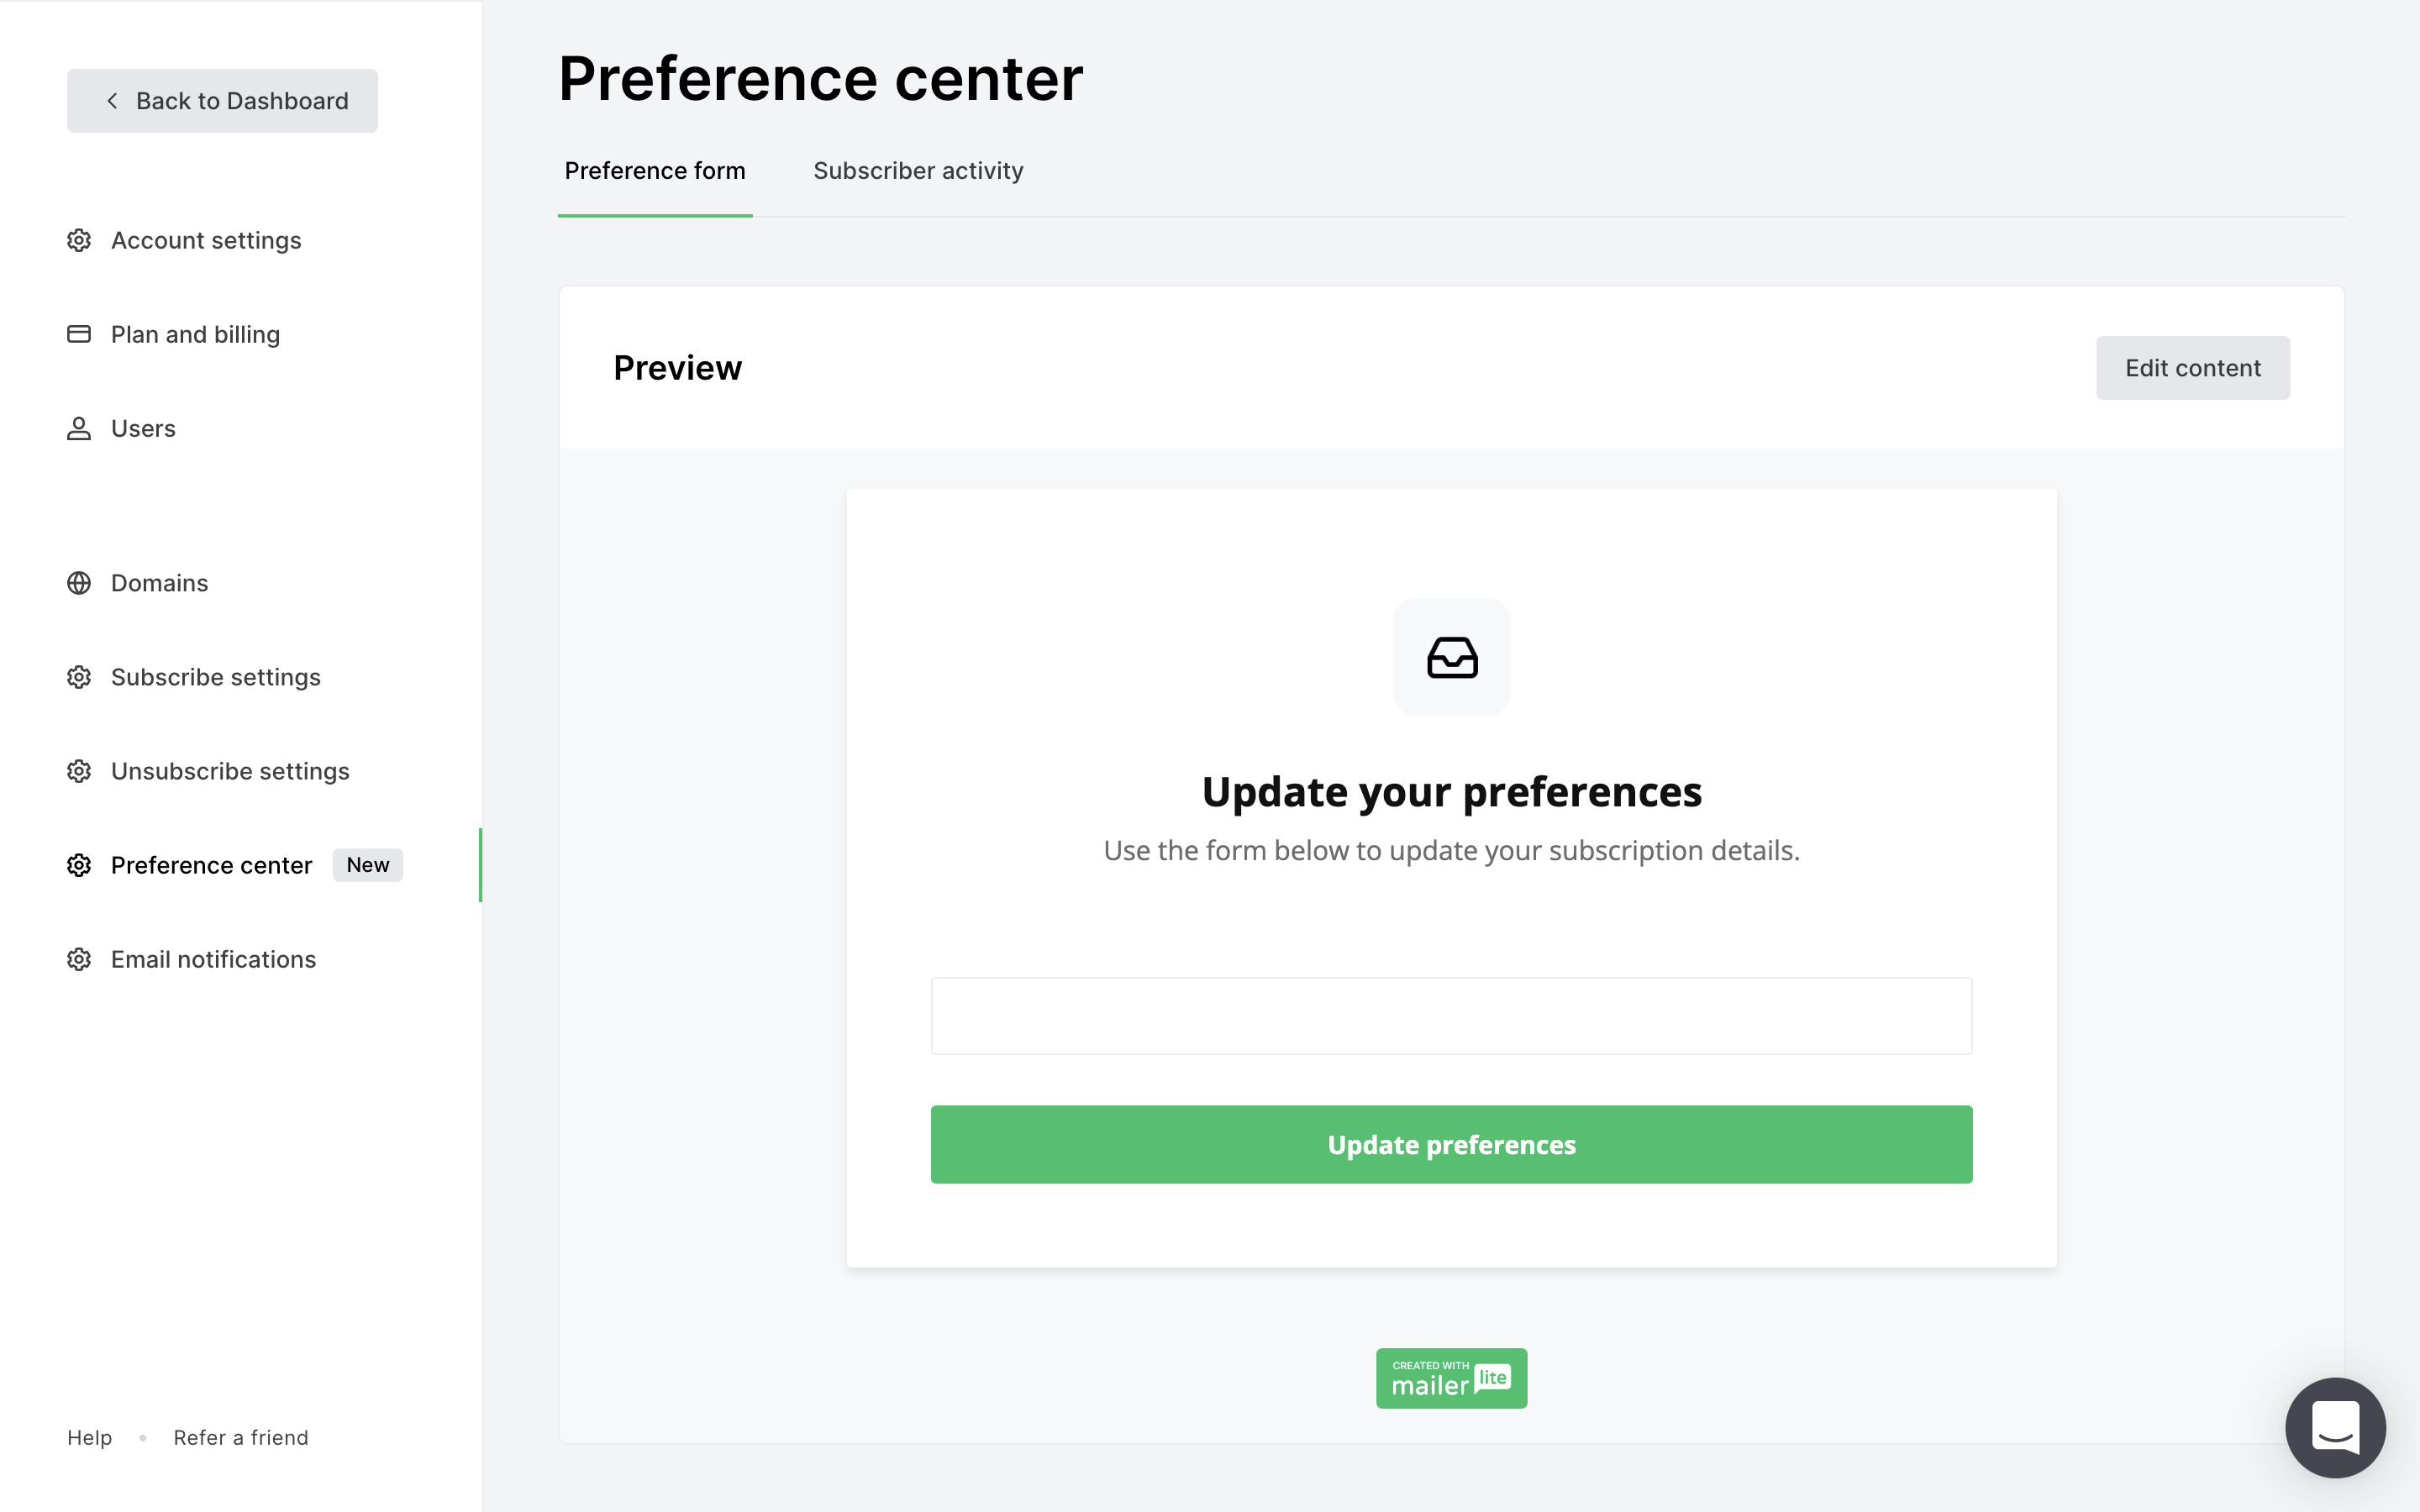 MailerLite's email preference center editor